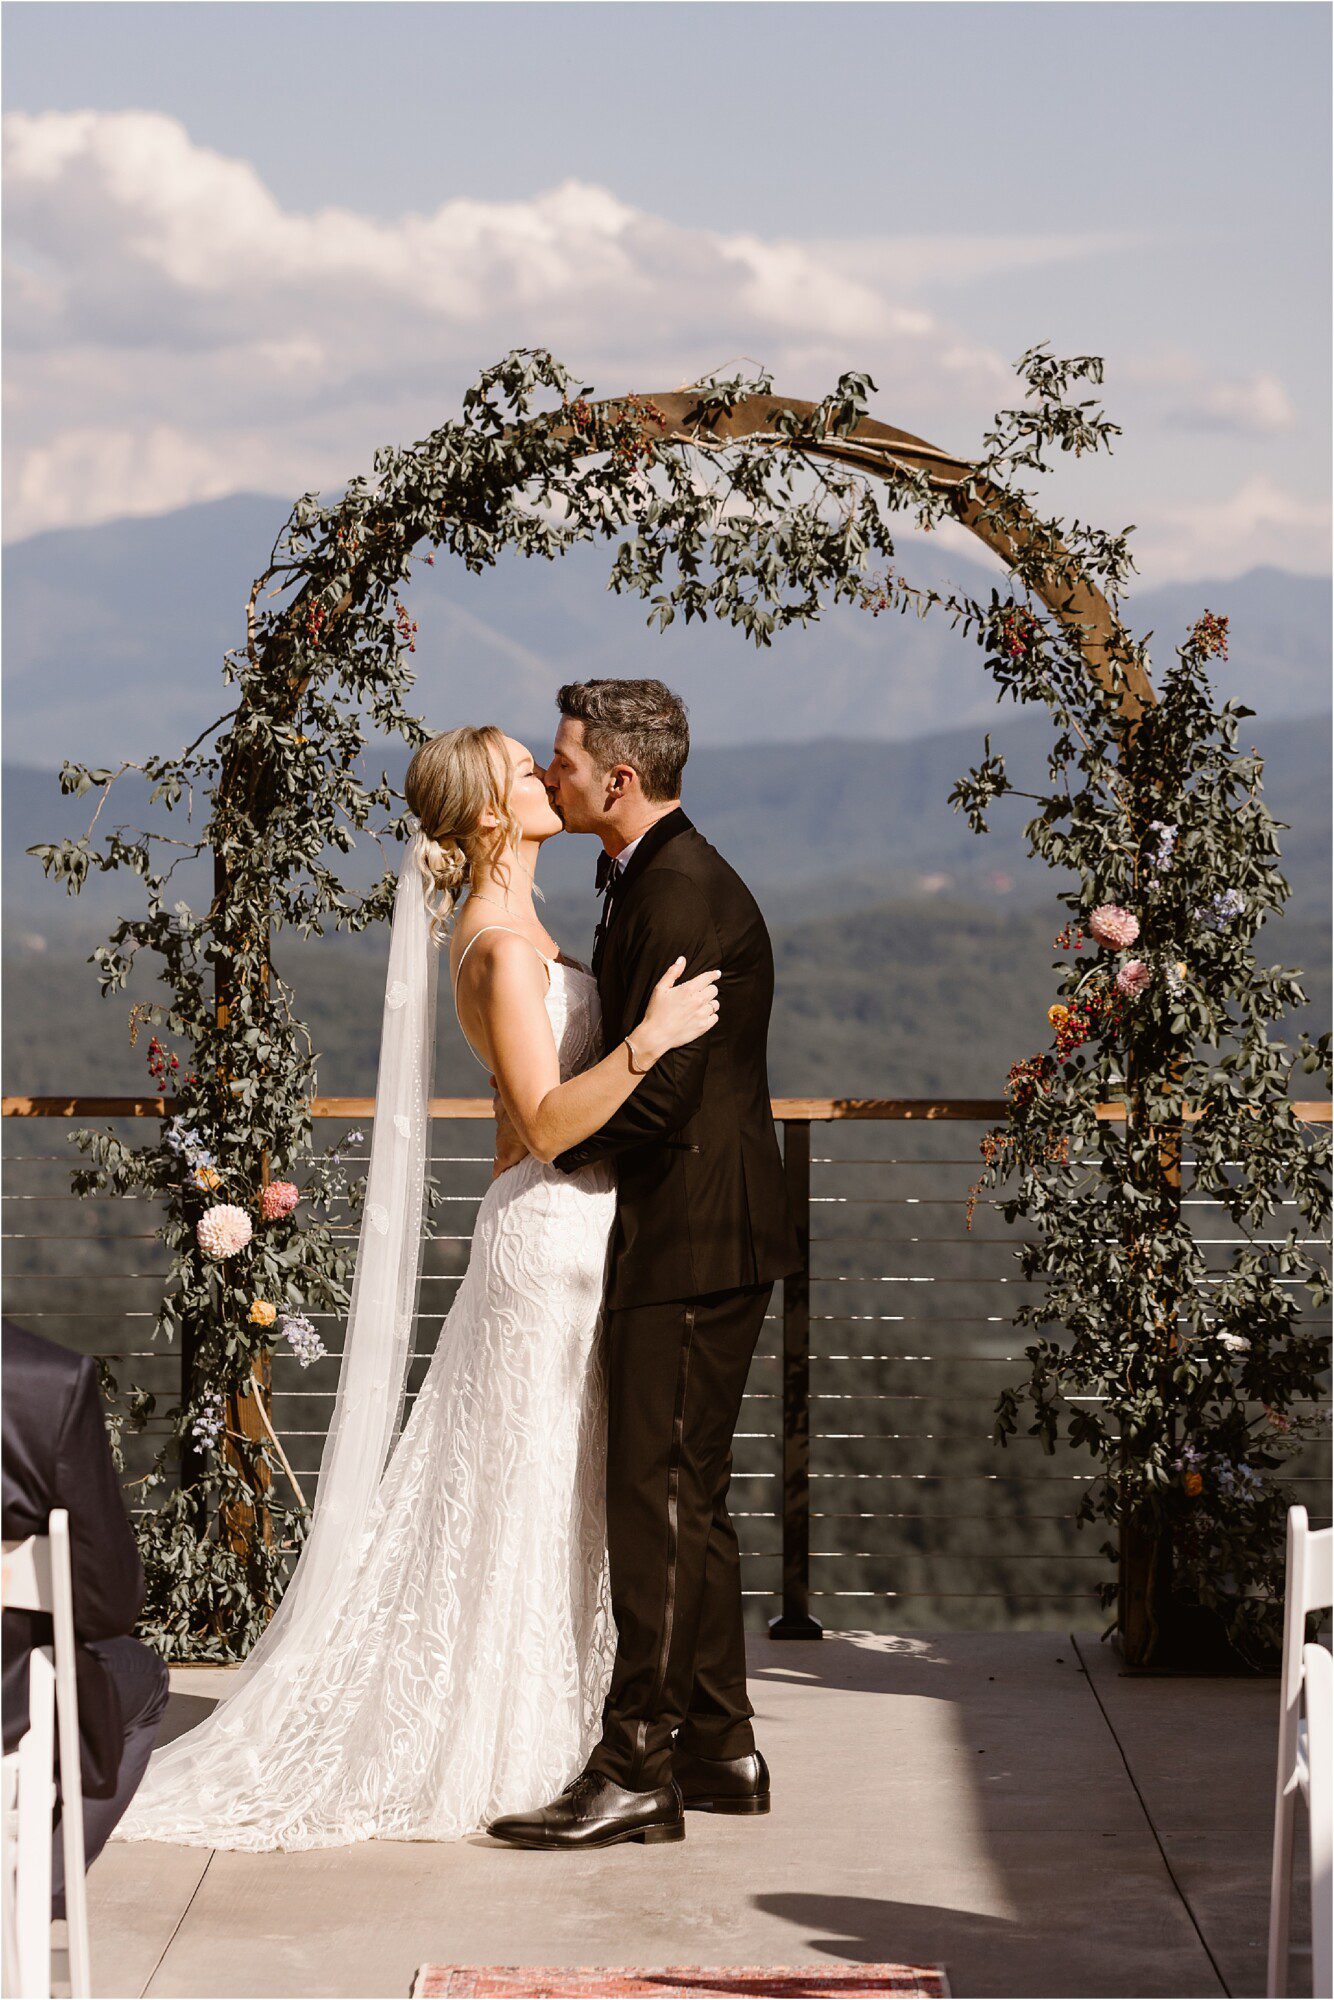 bride and groom kiss at wedding ceremony with floral arbor